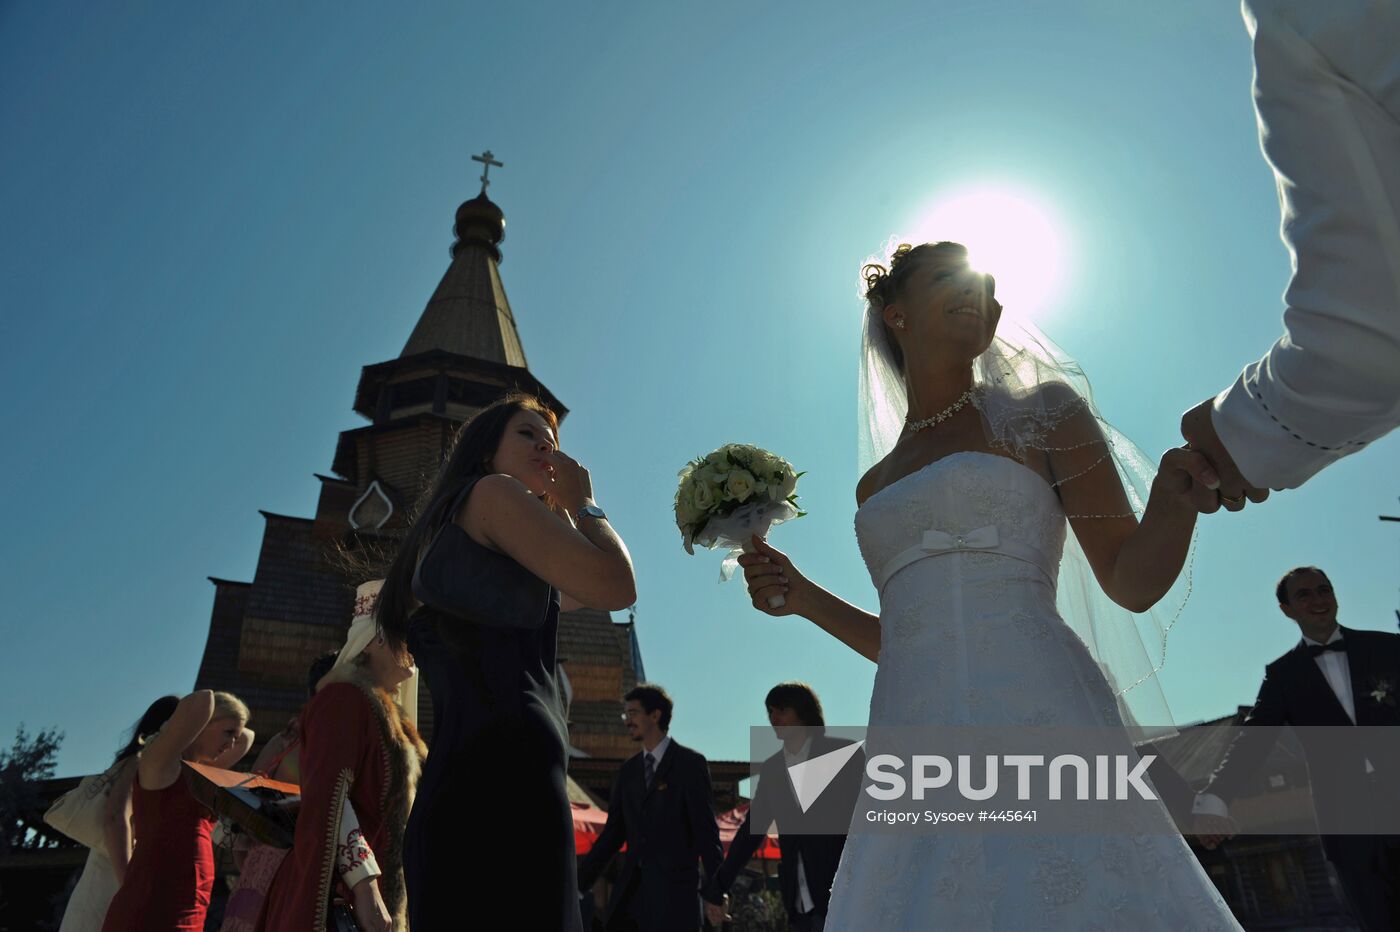 Couple weds at Moscow's Izmailovo Kremlin registry office